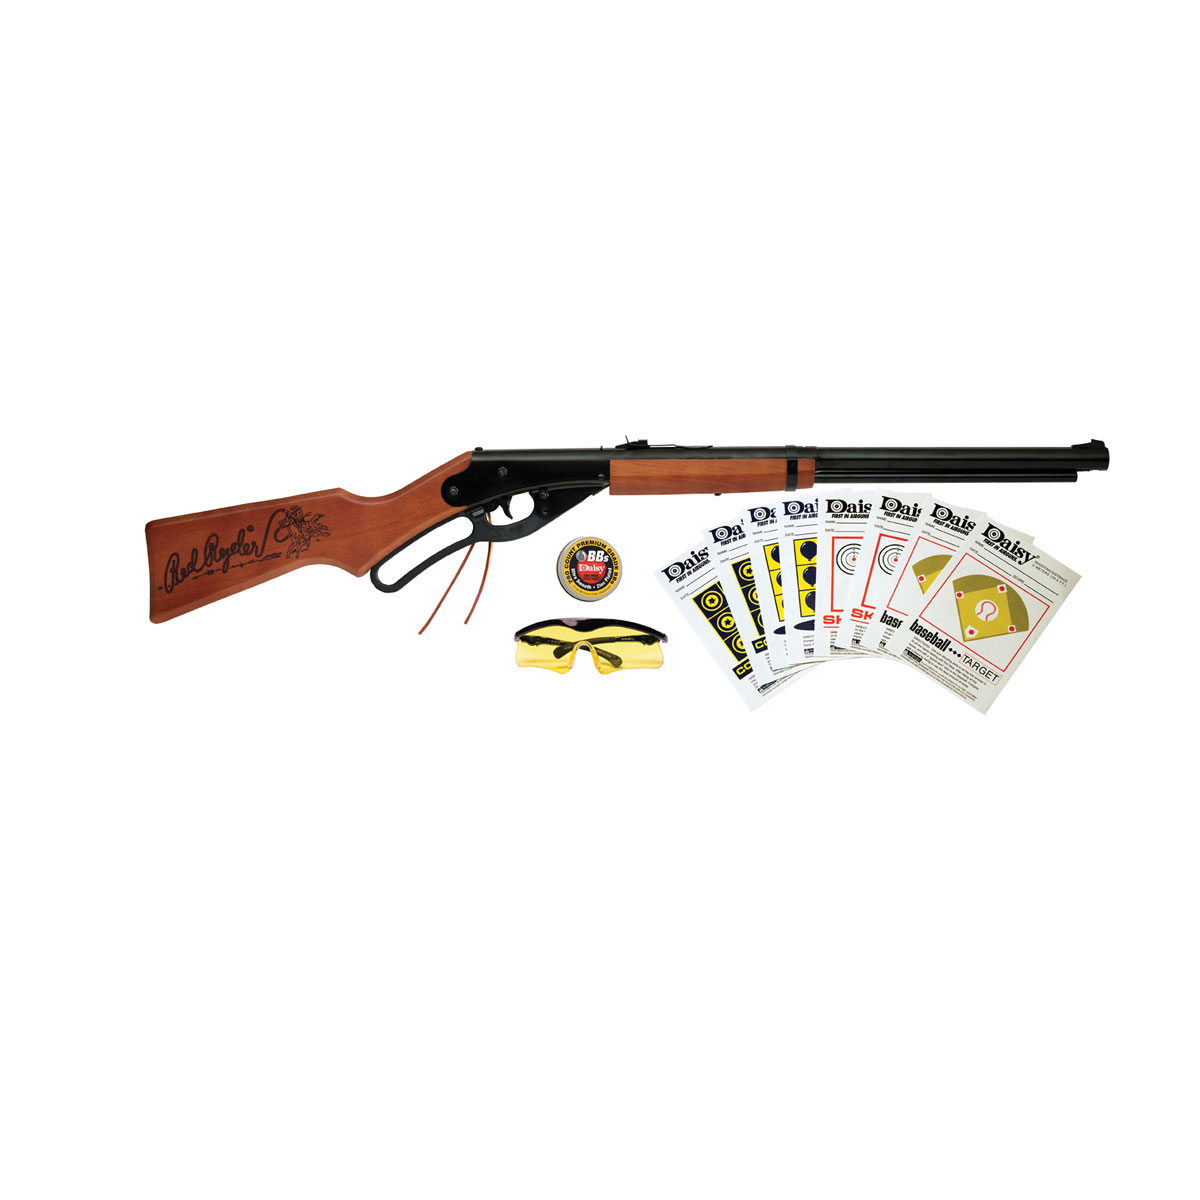 Daisy Red Ryder Carbine BB Gun BRAND NEW KIT w/ Glasses Targets BB's included 